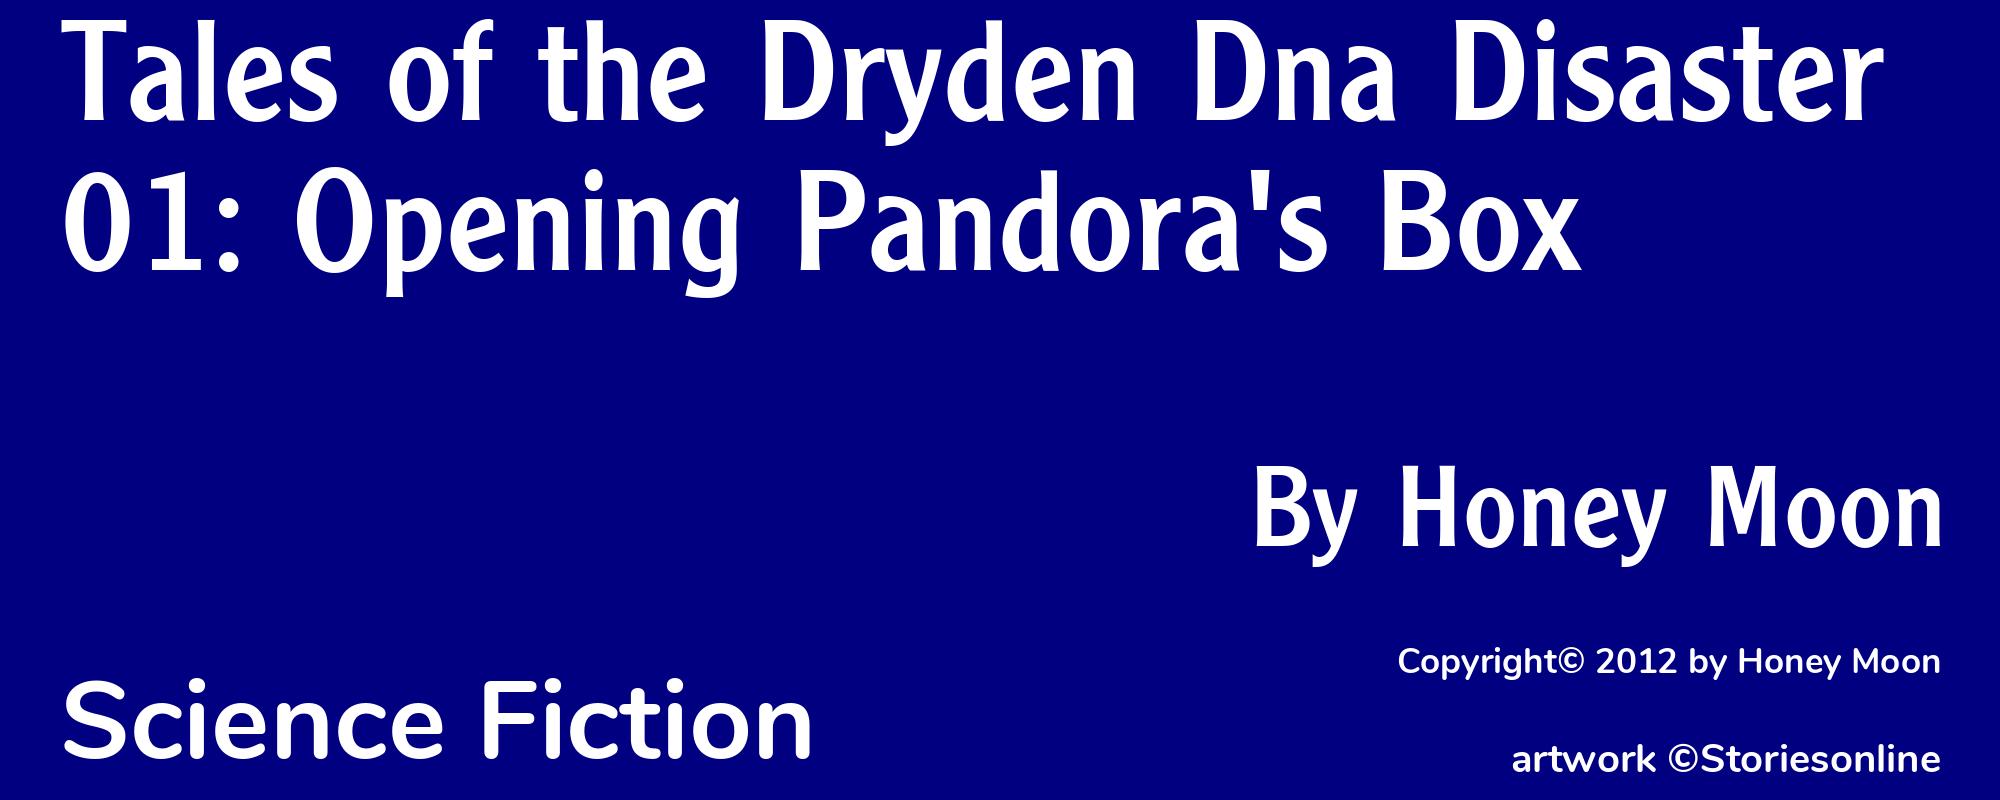 Tales of the Dryden Dna Disaster 01: Opening Pandora's Box - Cover